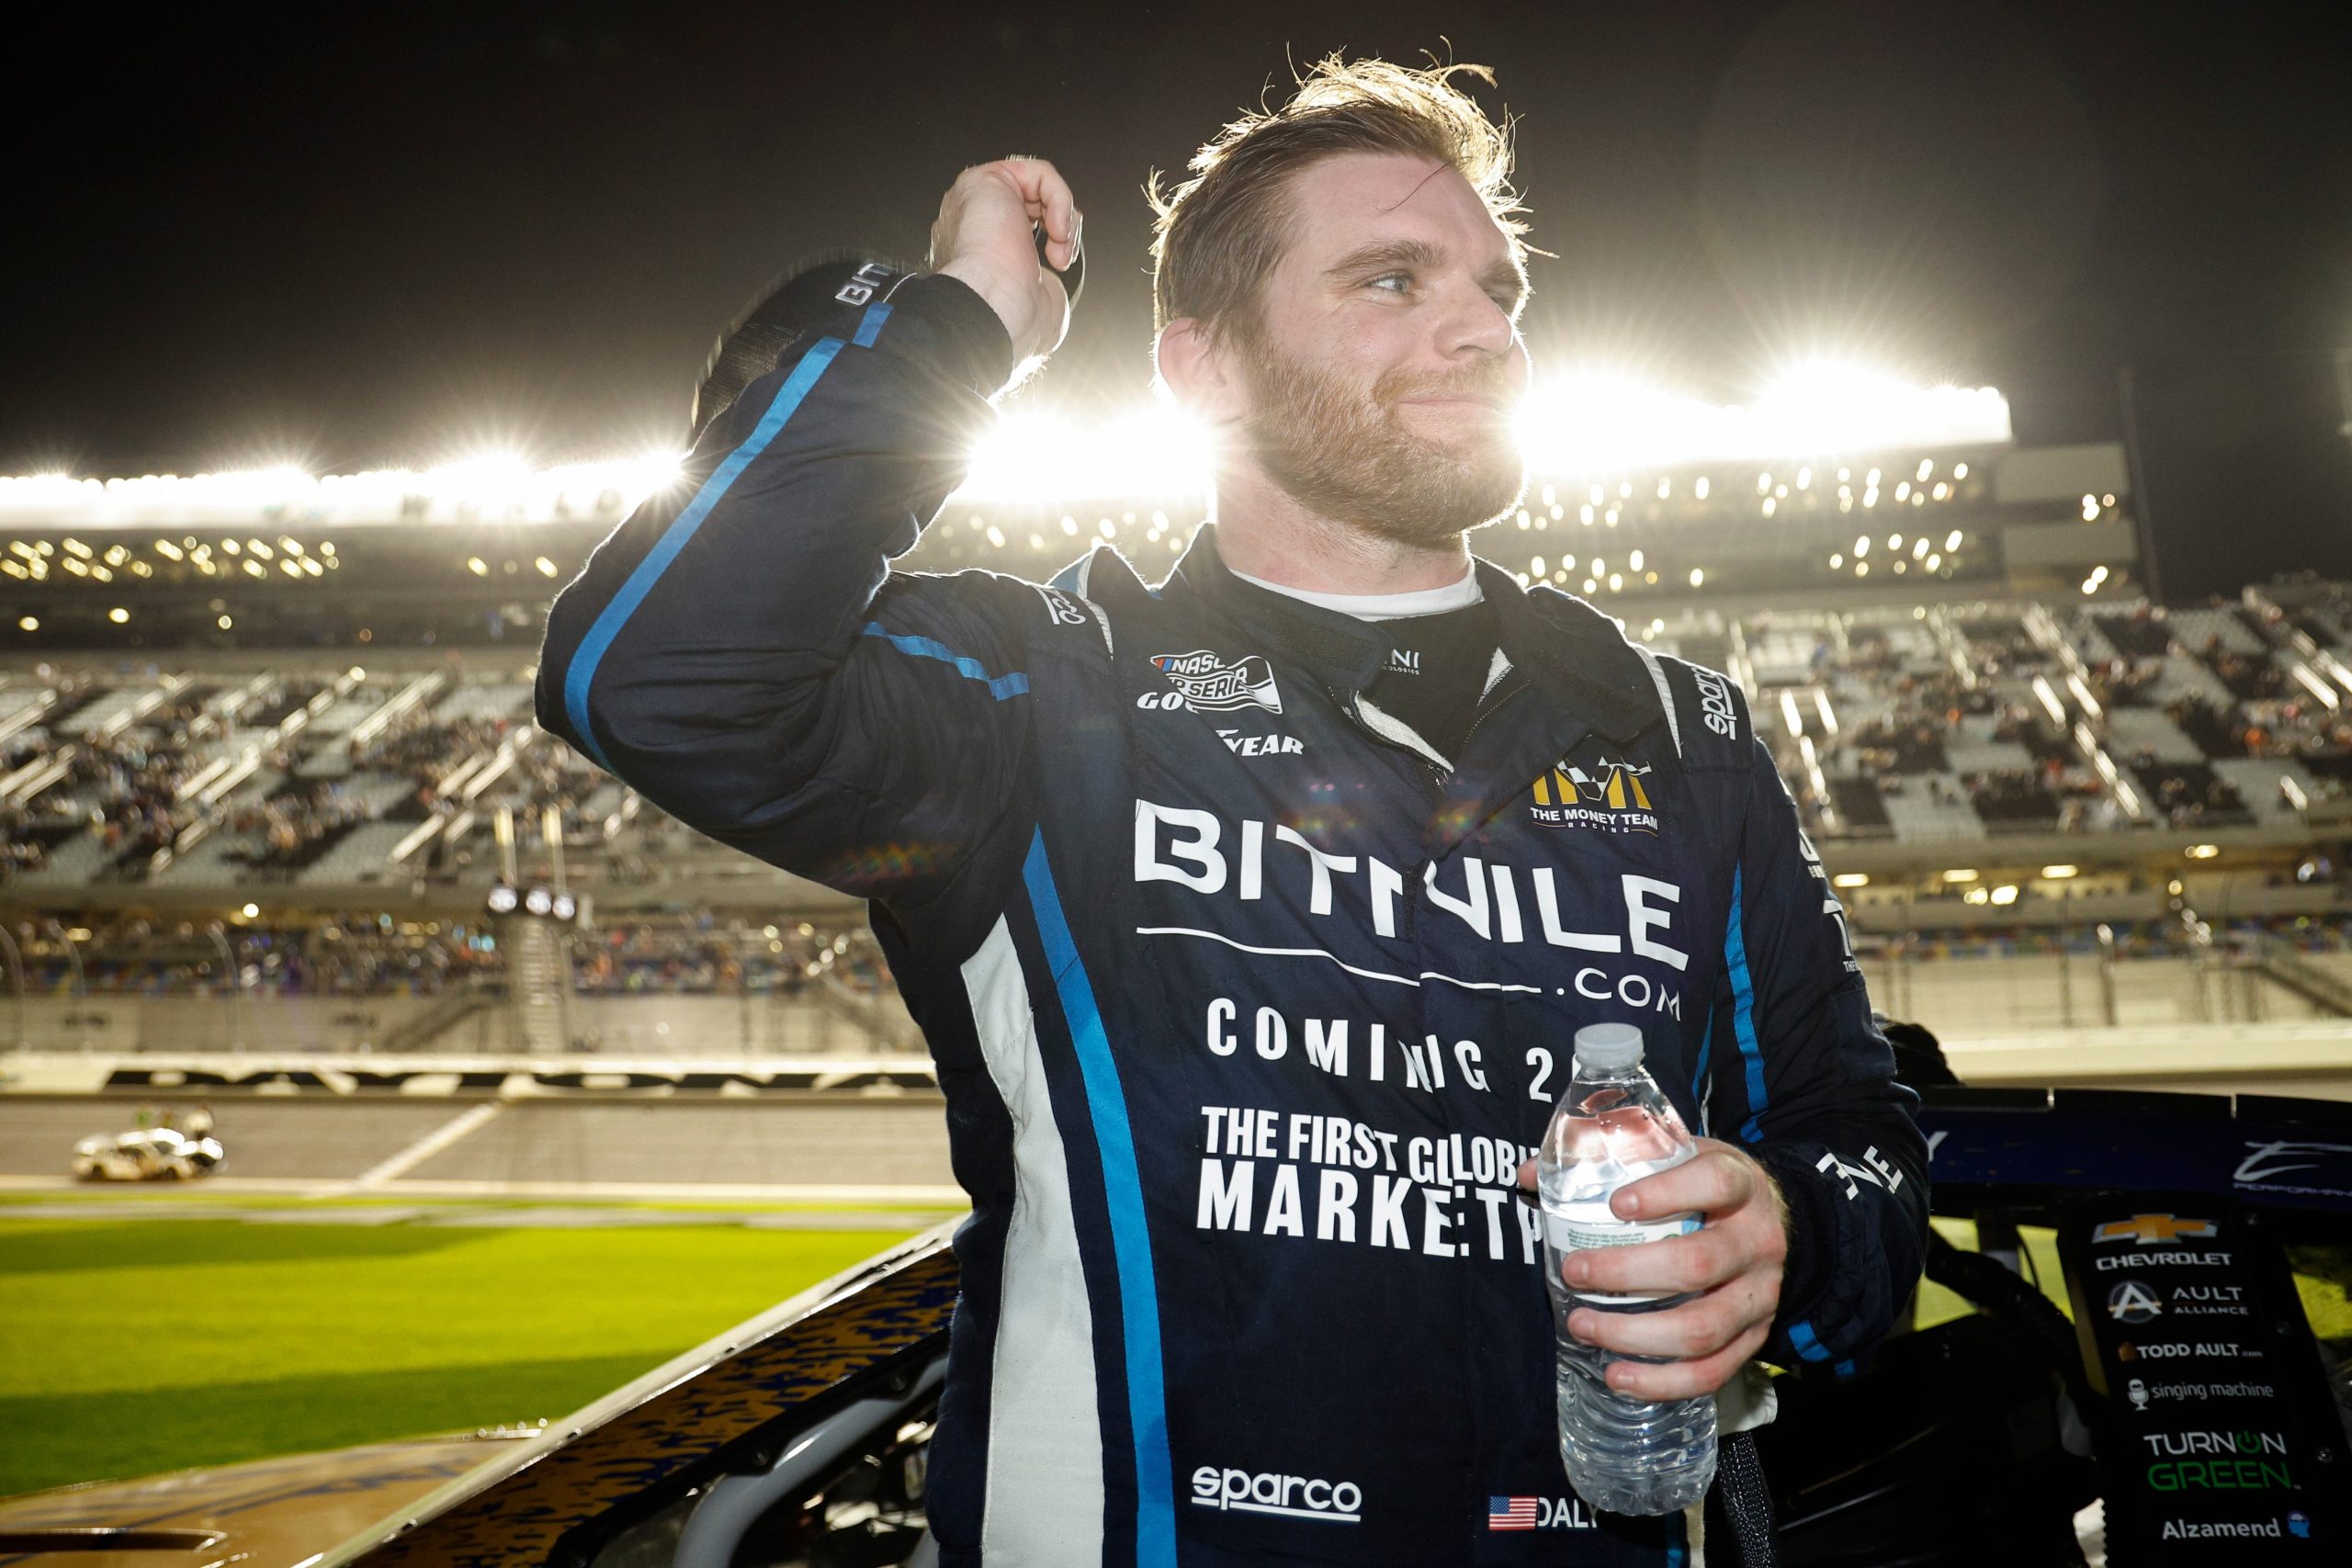 DAYTONA BEACH, Fla. - FEBRUARY 16: Conor Daly, driver of the #50 BitNile.com Chevrolet, reacts after the NASCAR Cup Series Bluegreen Vacations Duel #2 at Daytona International Speedway on Feb. 16, 2023, in Daytona Beach, Florida. Photo: Chris Graythen/Getty Images